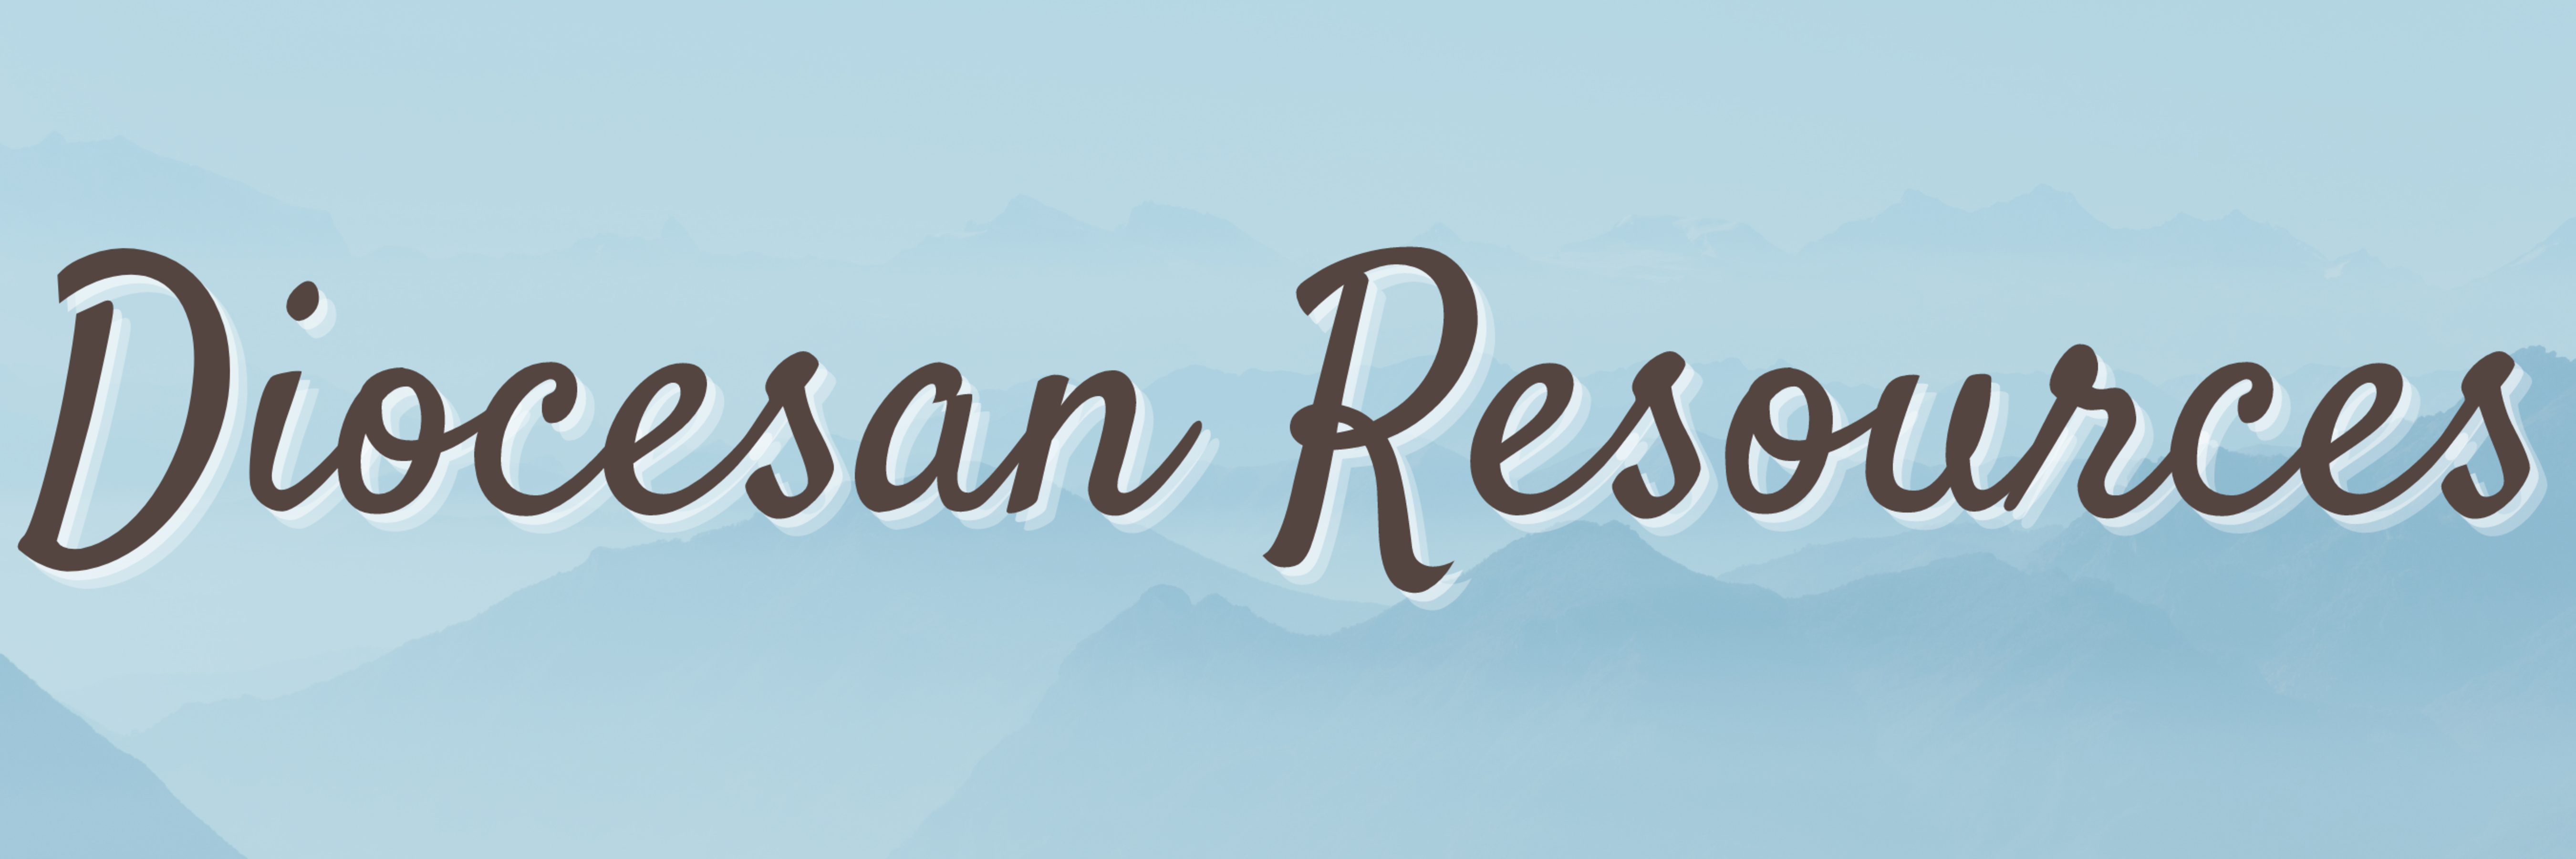 Diocesan Resources Image Button